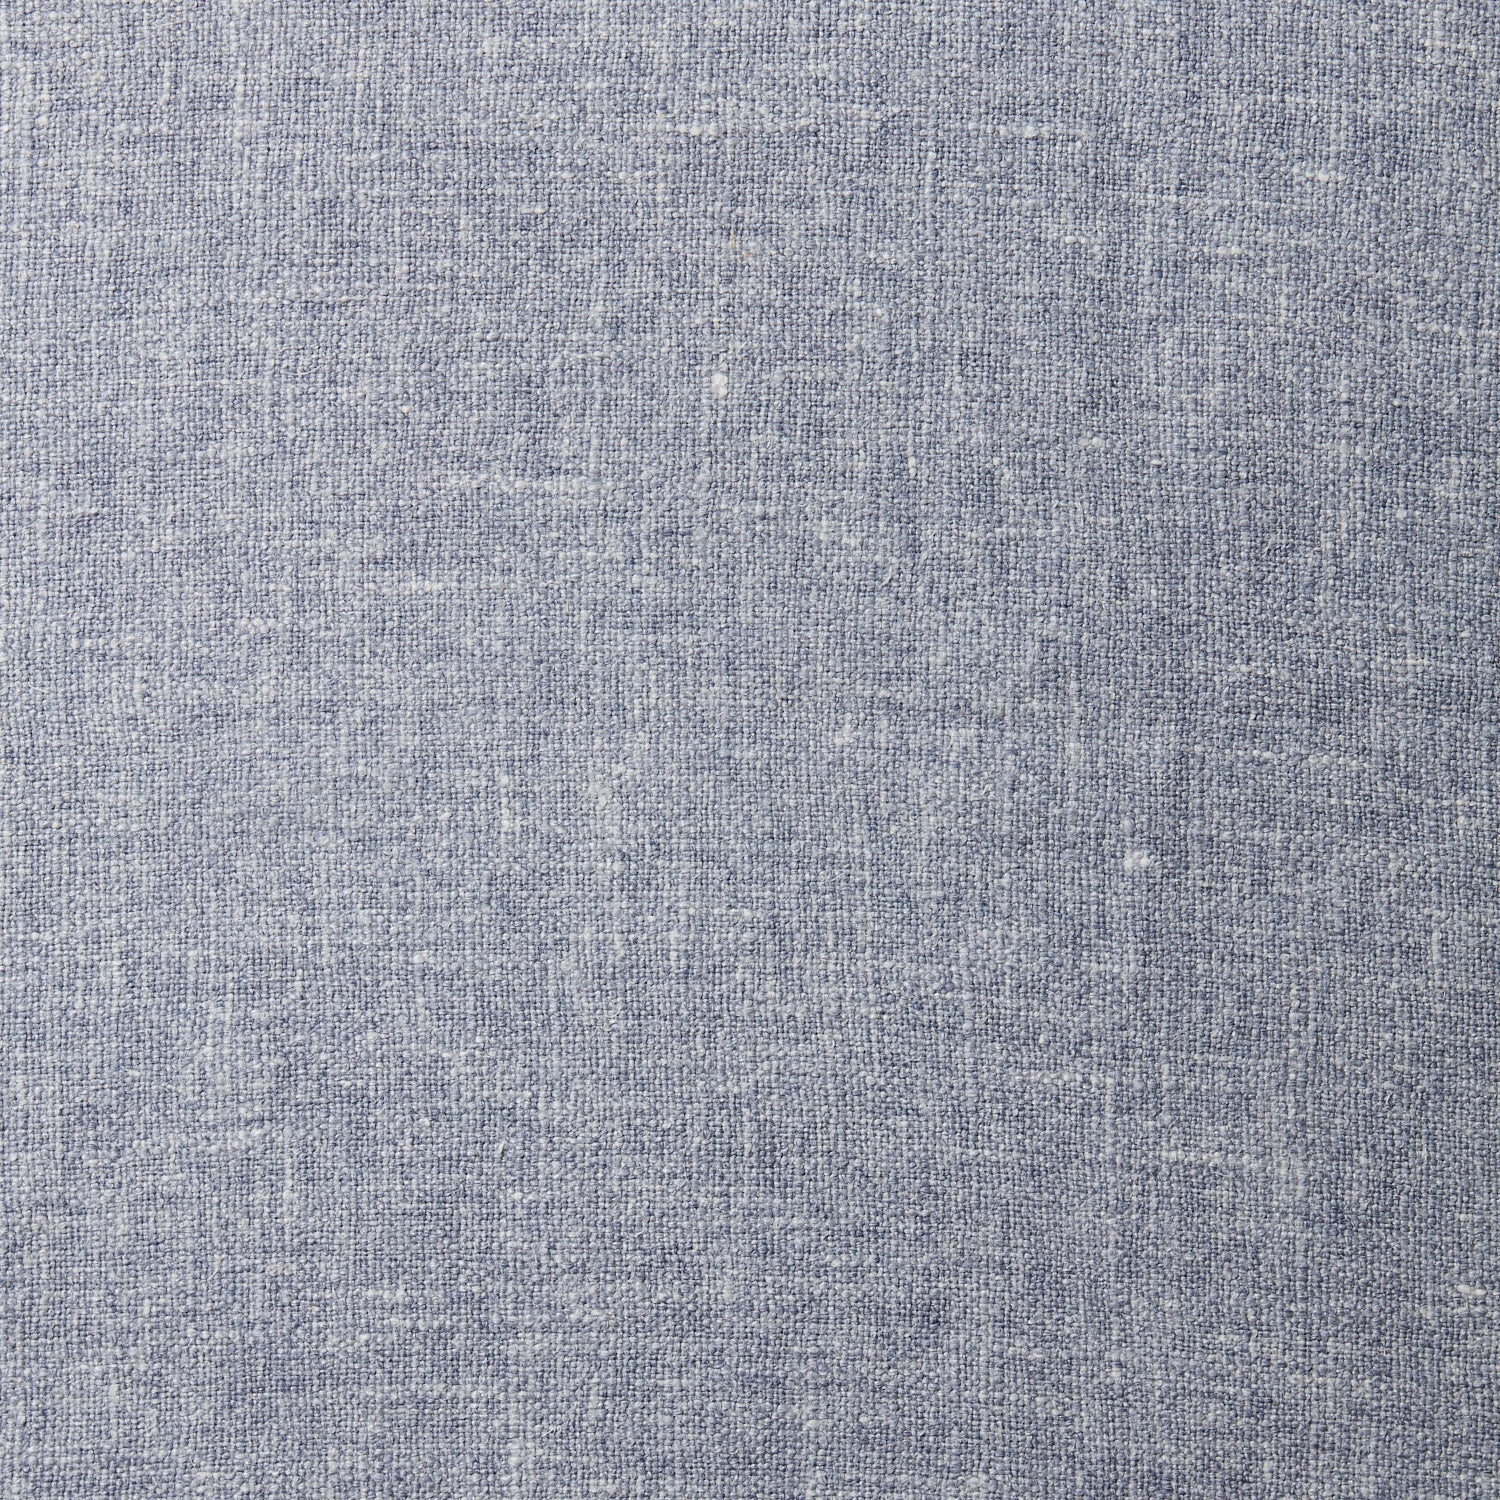 A swatch of blended linen fabric in a mottled light navy color.